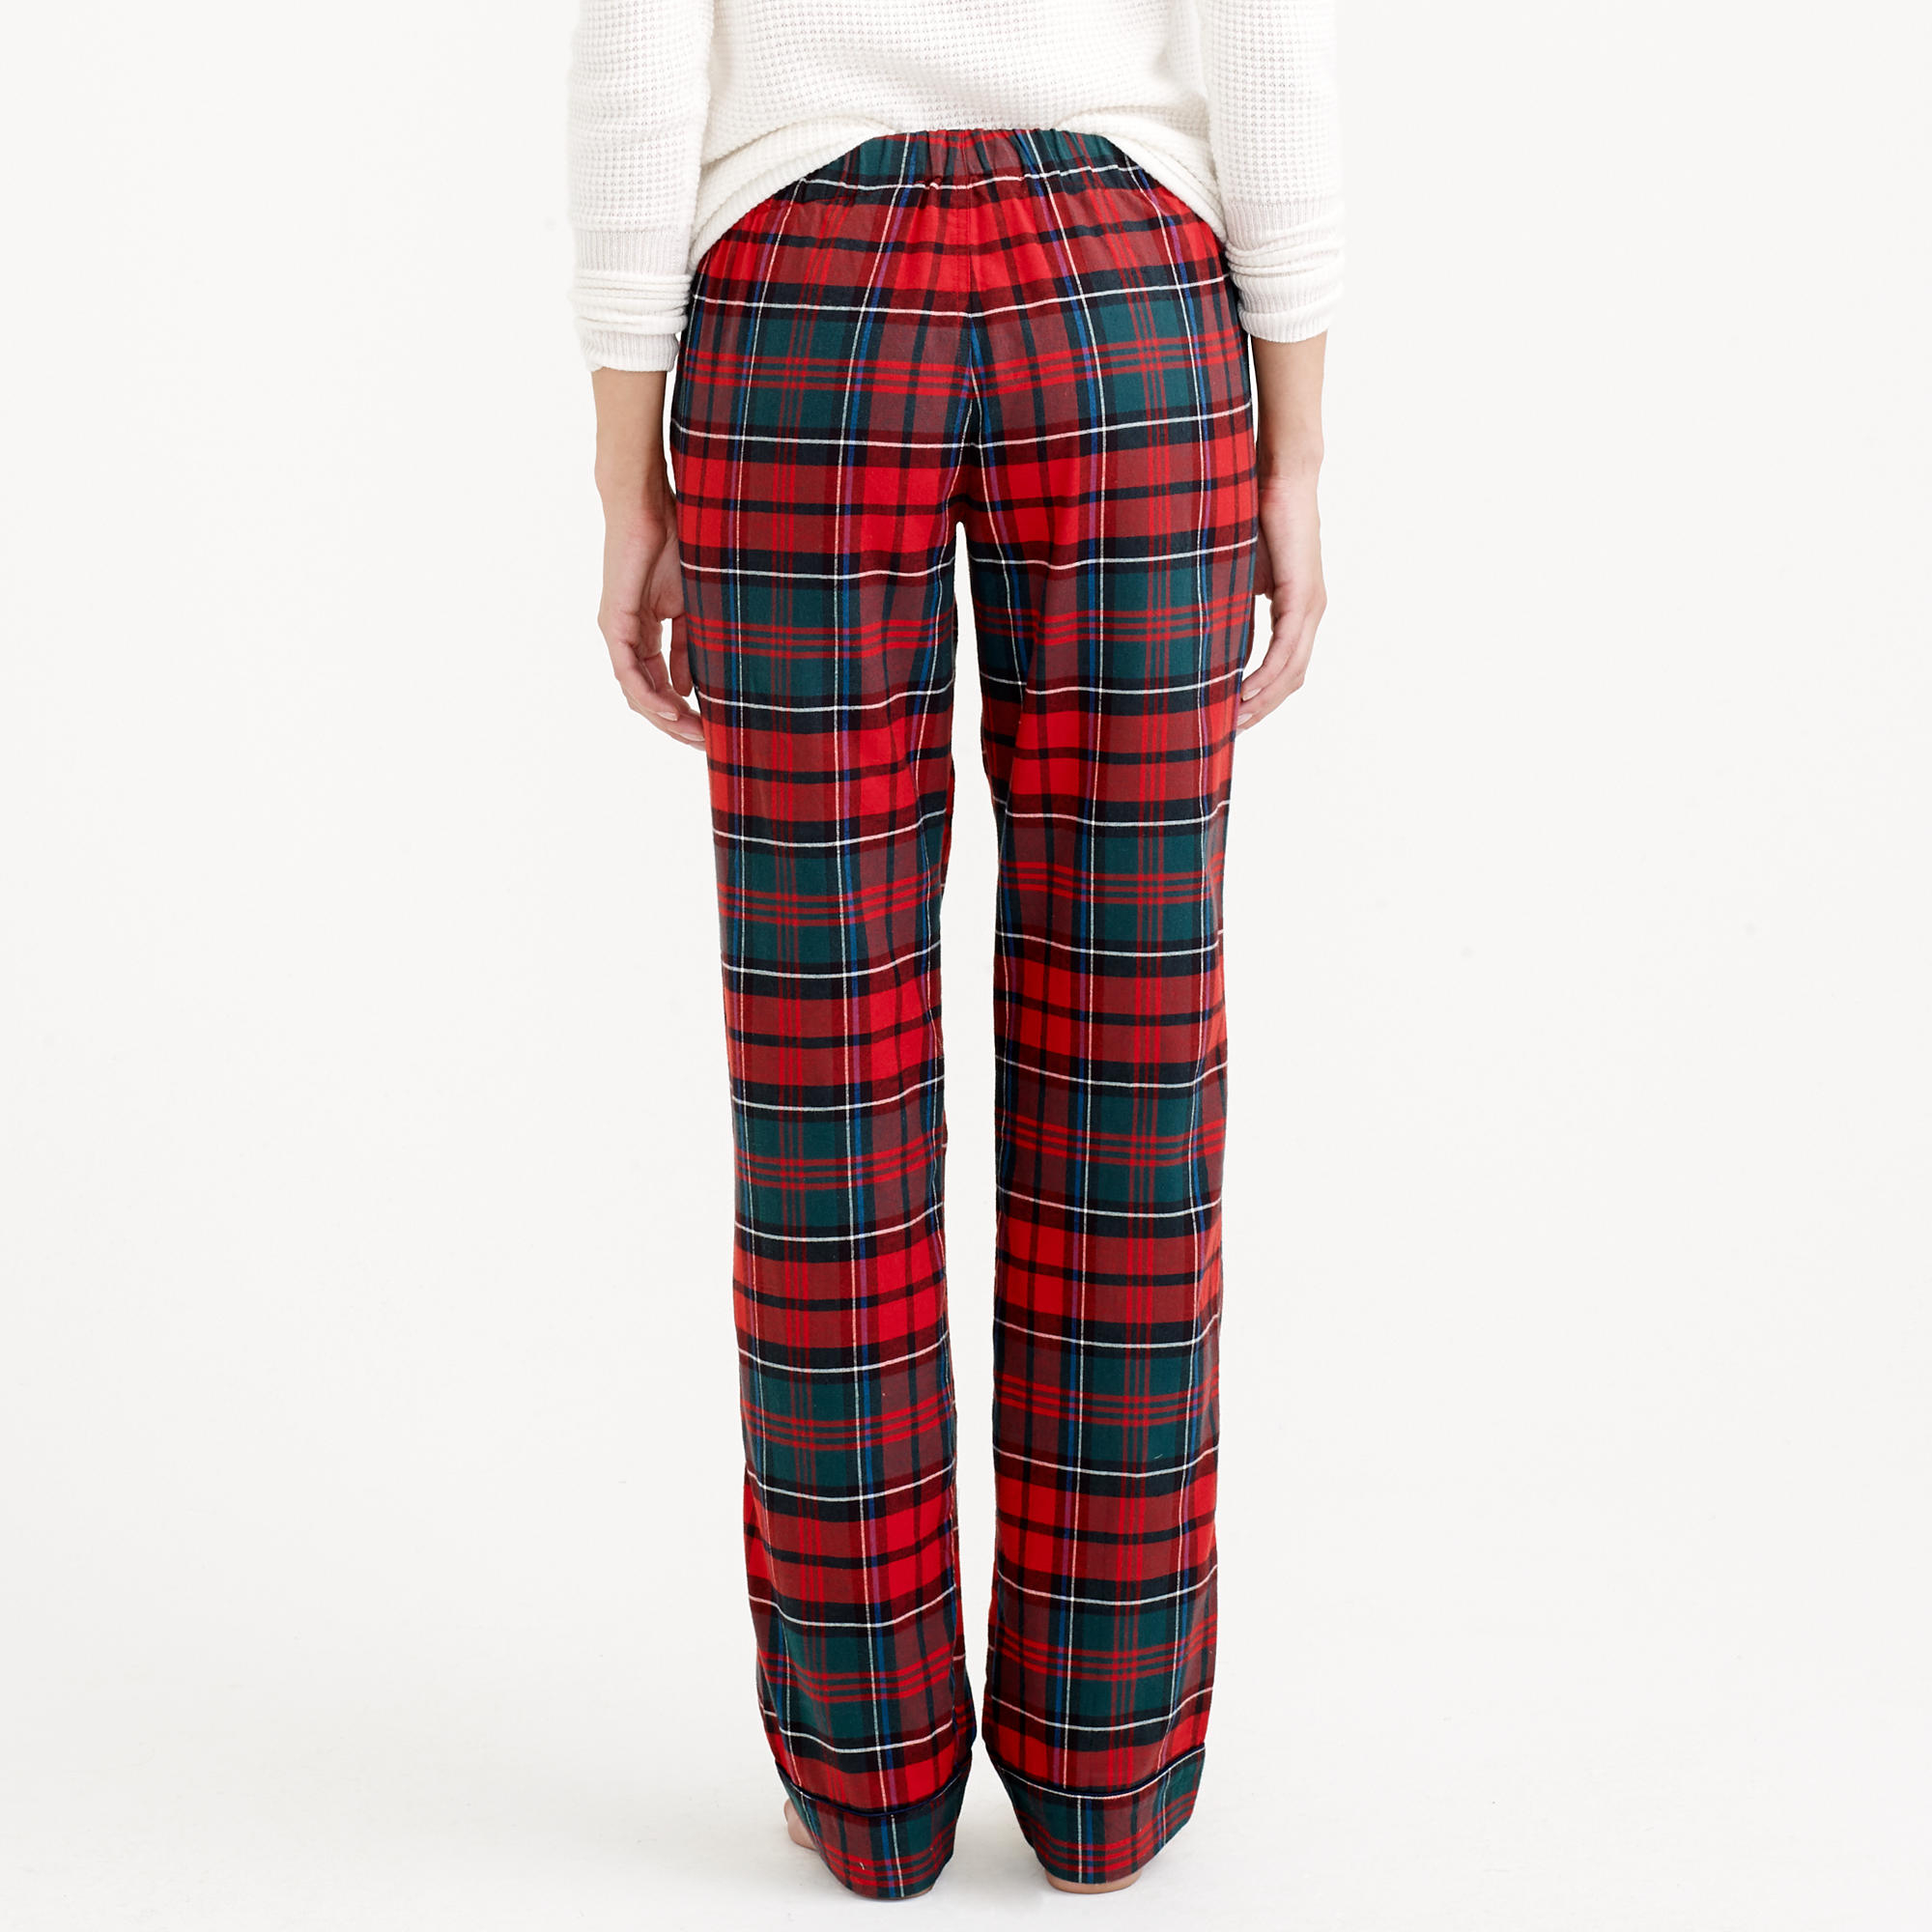 Lyst - J.Crew Pajama Pant In Plaid Flannel in Red